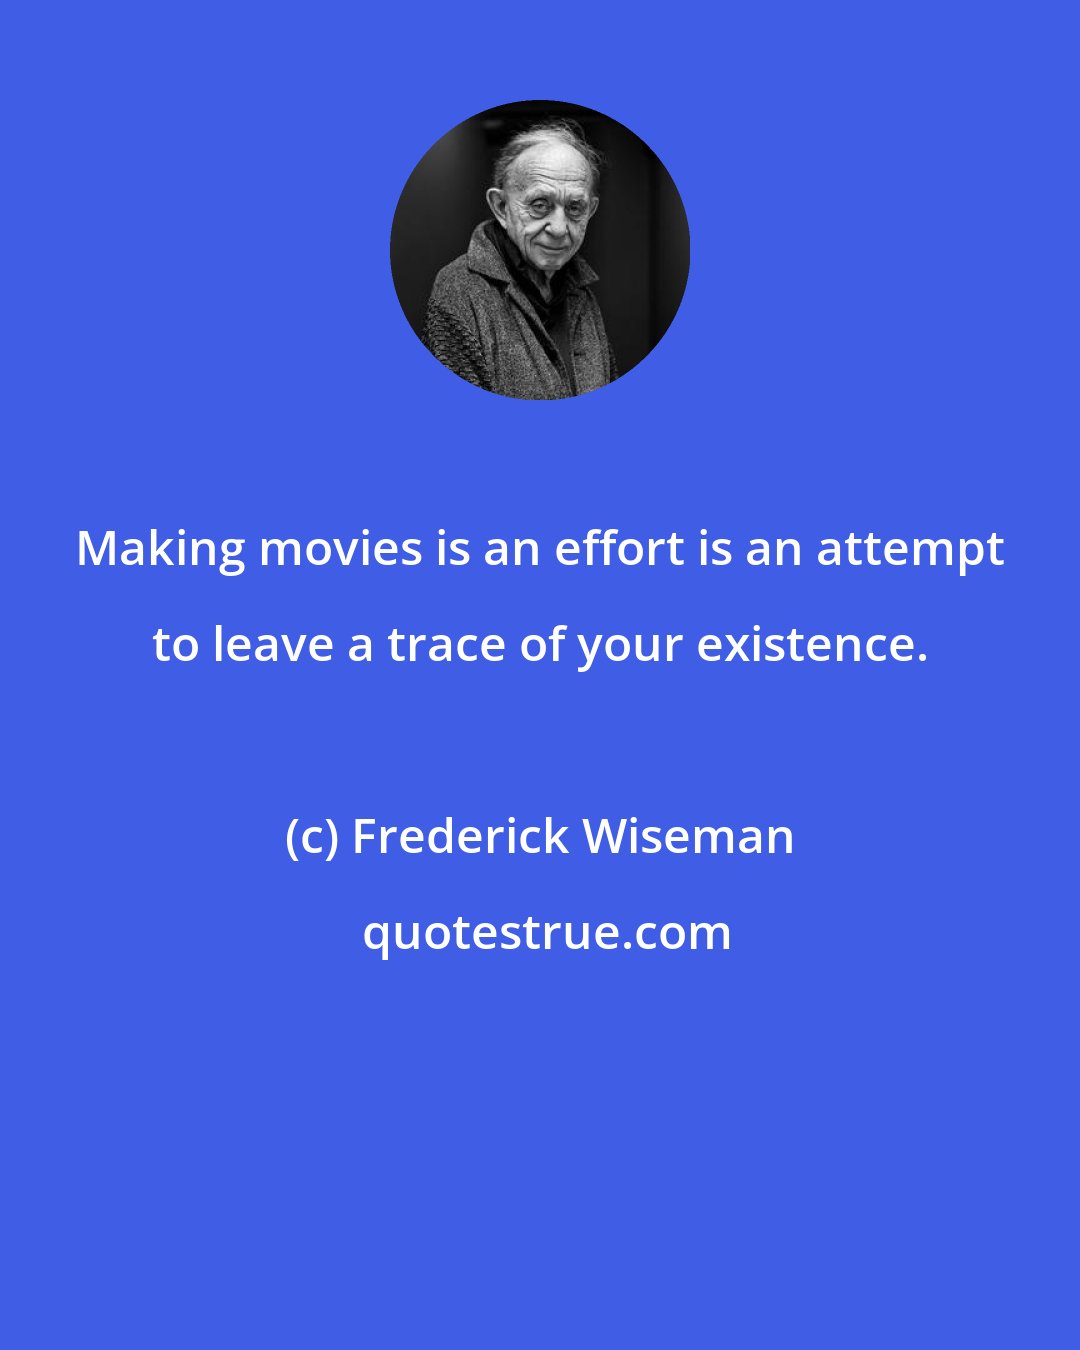 Frederick Wiseman: Making movies is an effort is an attempt to leave a trace of your existence.